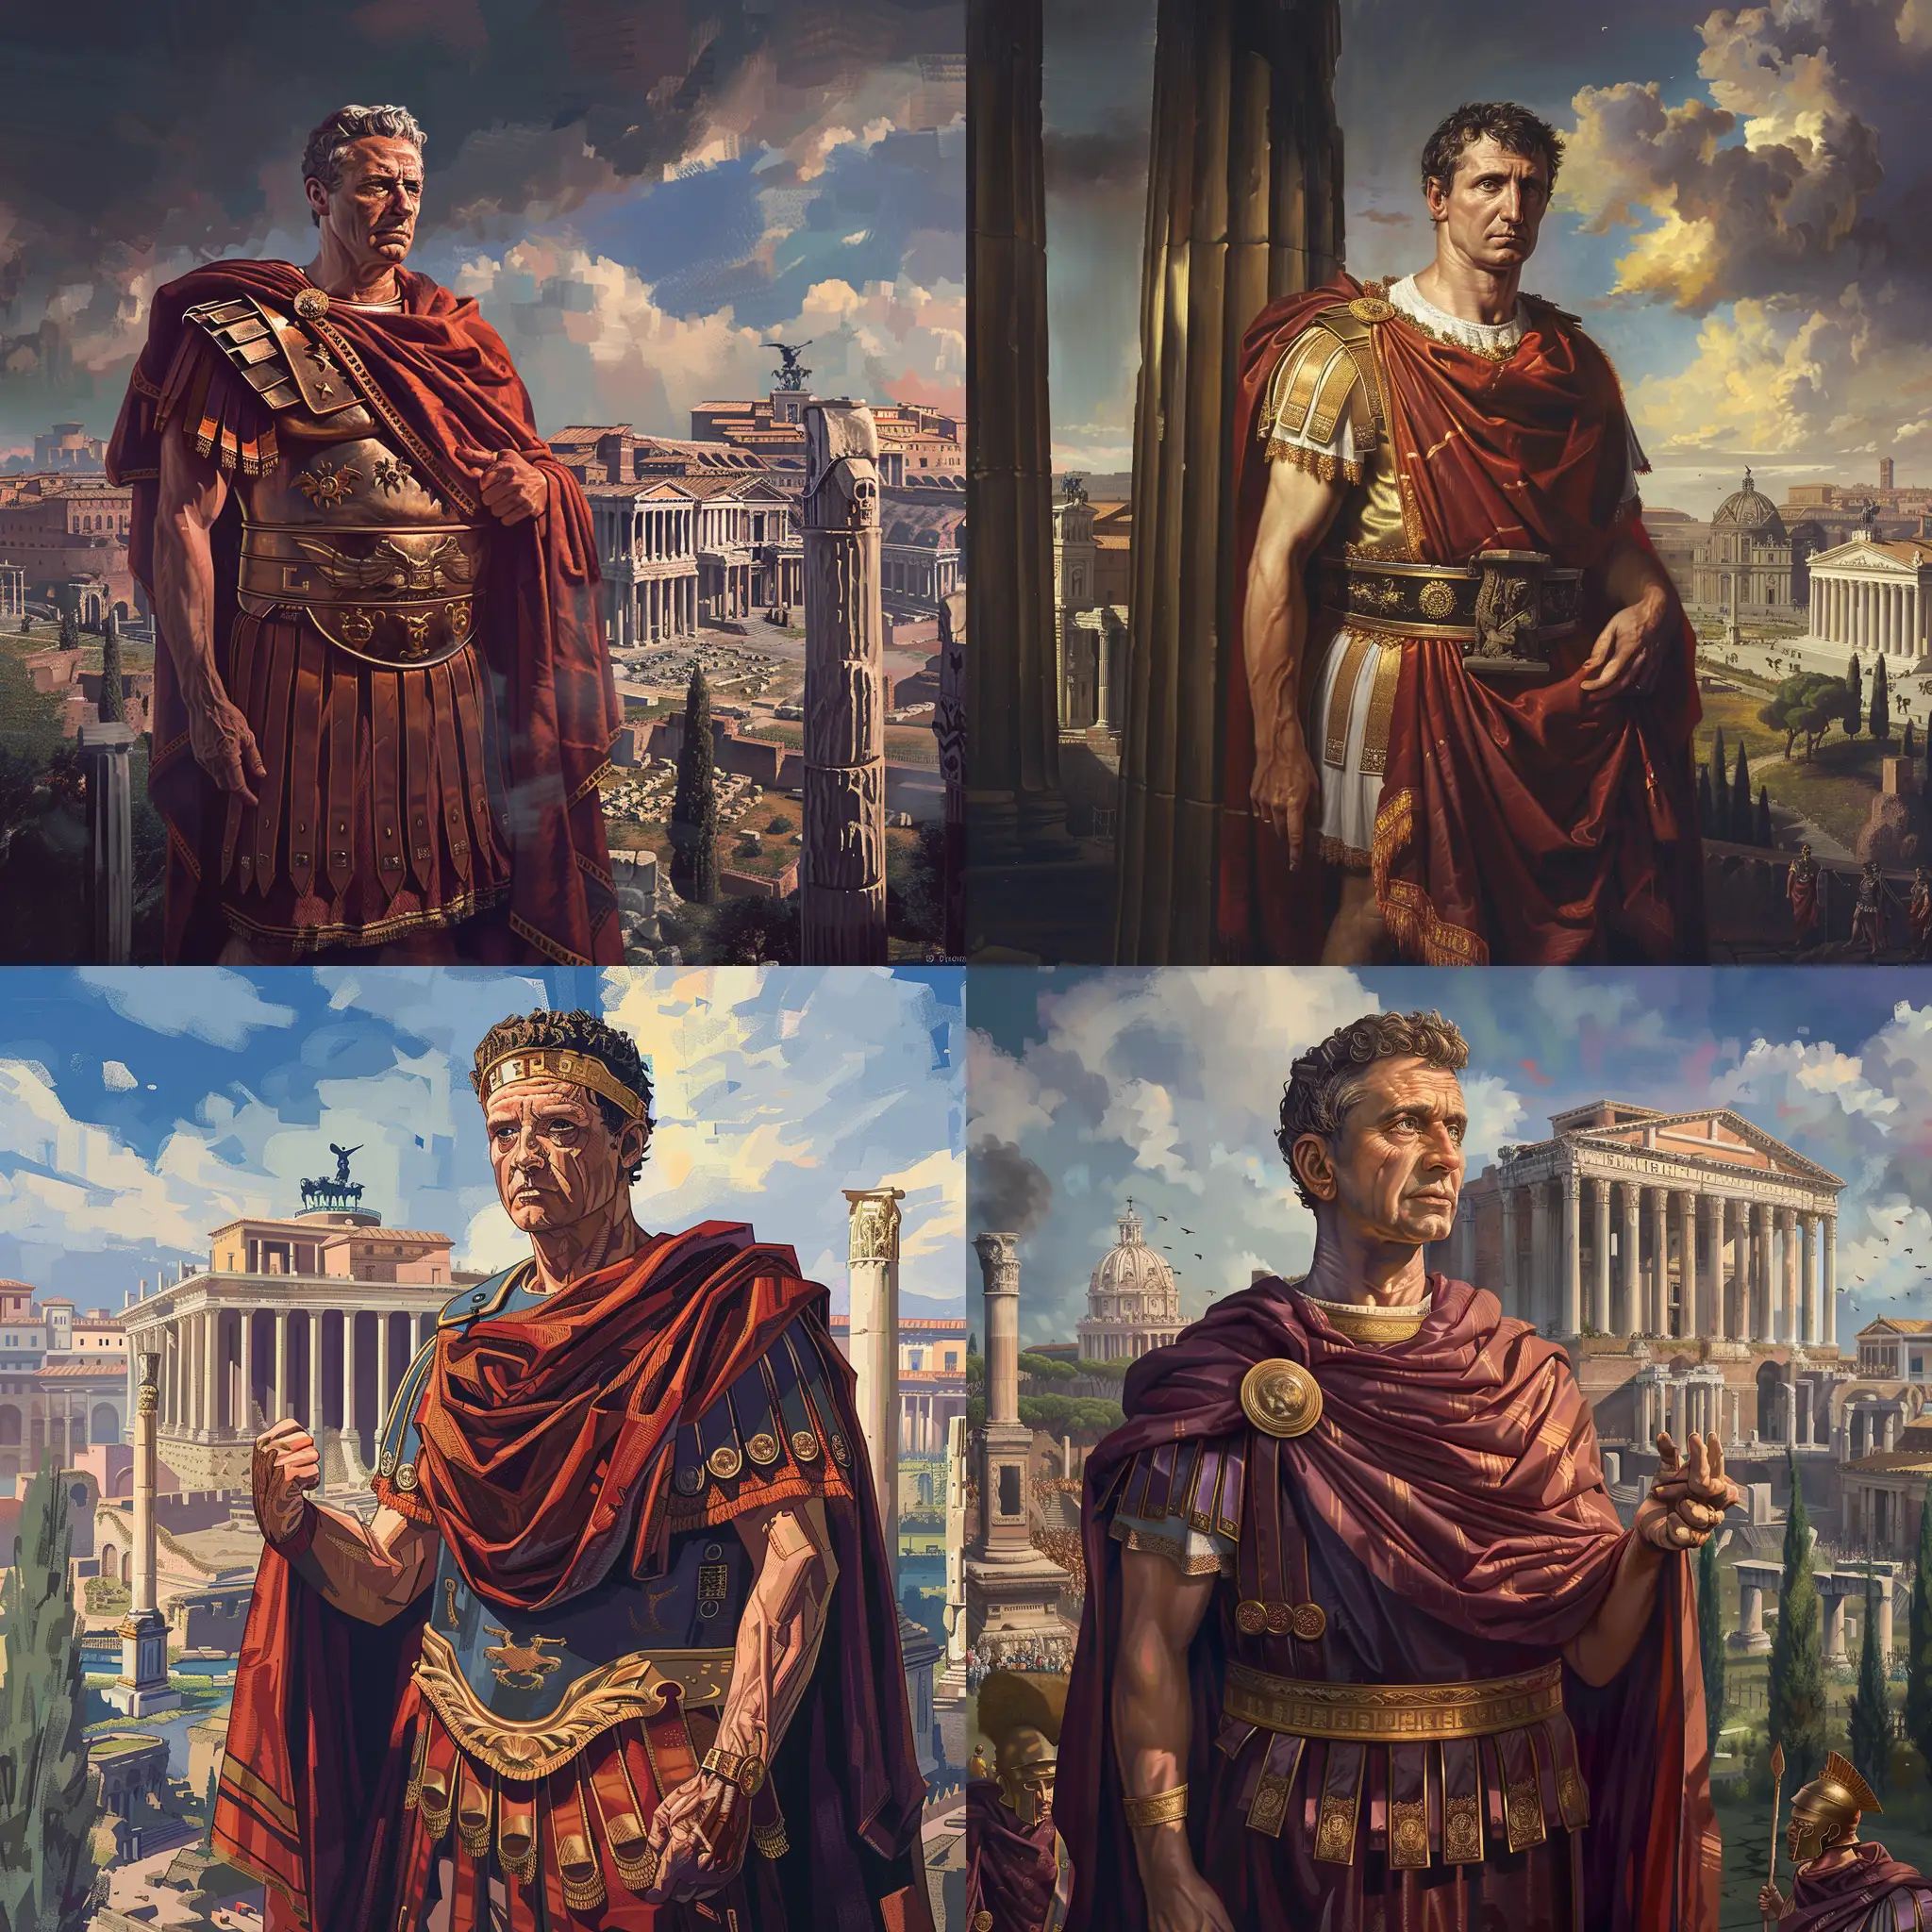 Julius Caesar, the great Roman emperor, standing in front of ancient Rome, artistic style